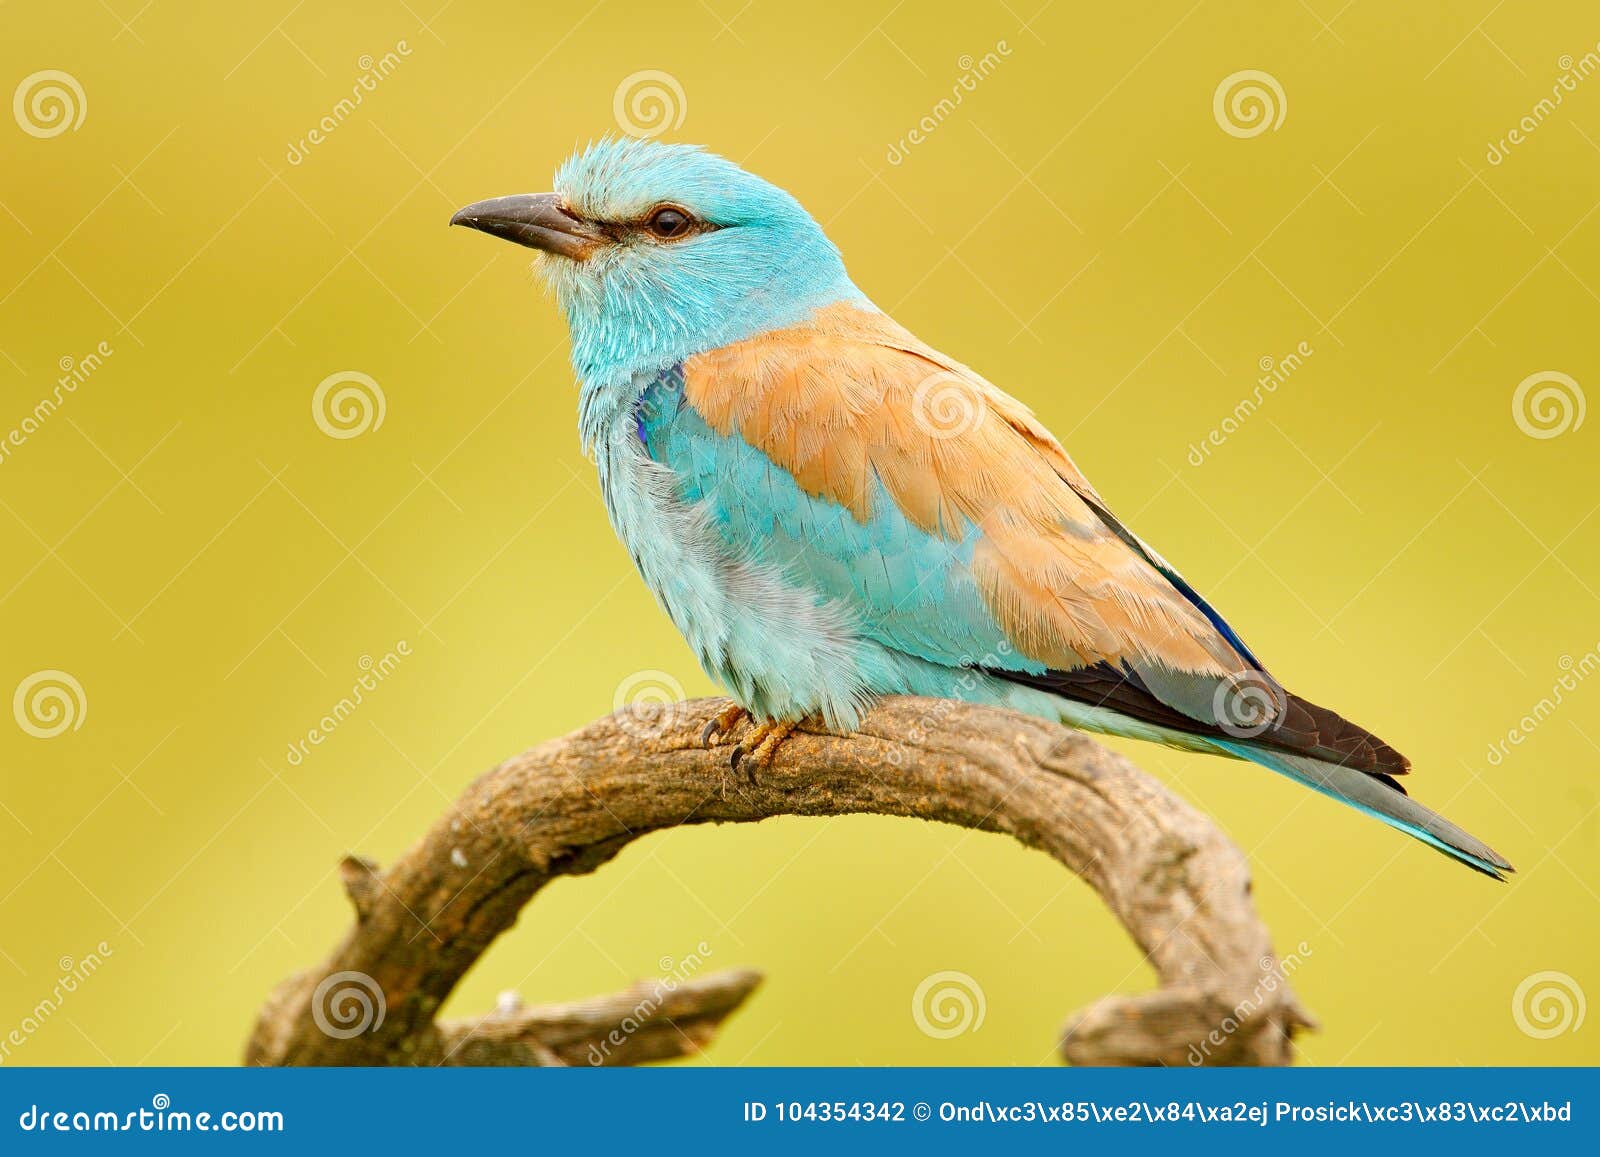 roller in nature. birdwatching in hungary. nice colour light blue bird european roller sitting on the branch with open bill, blurr